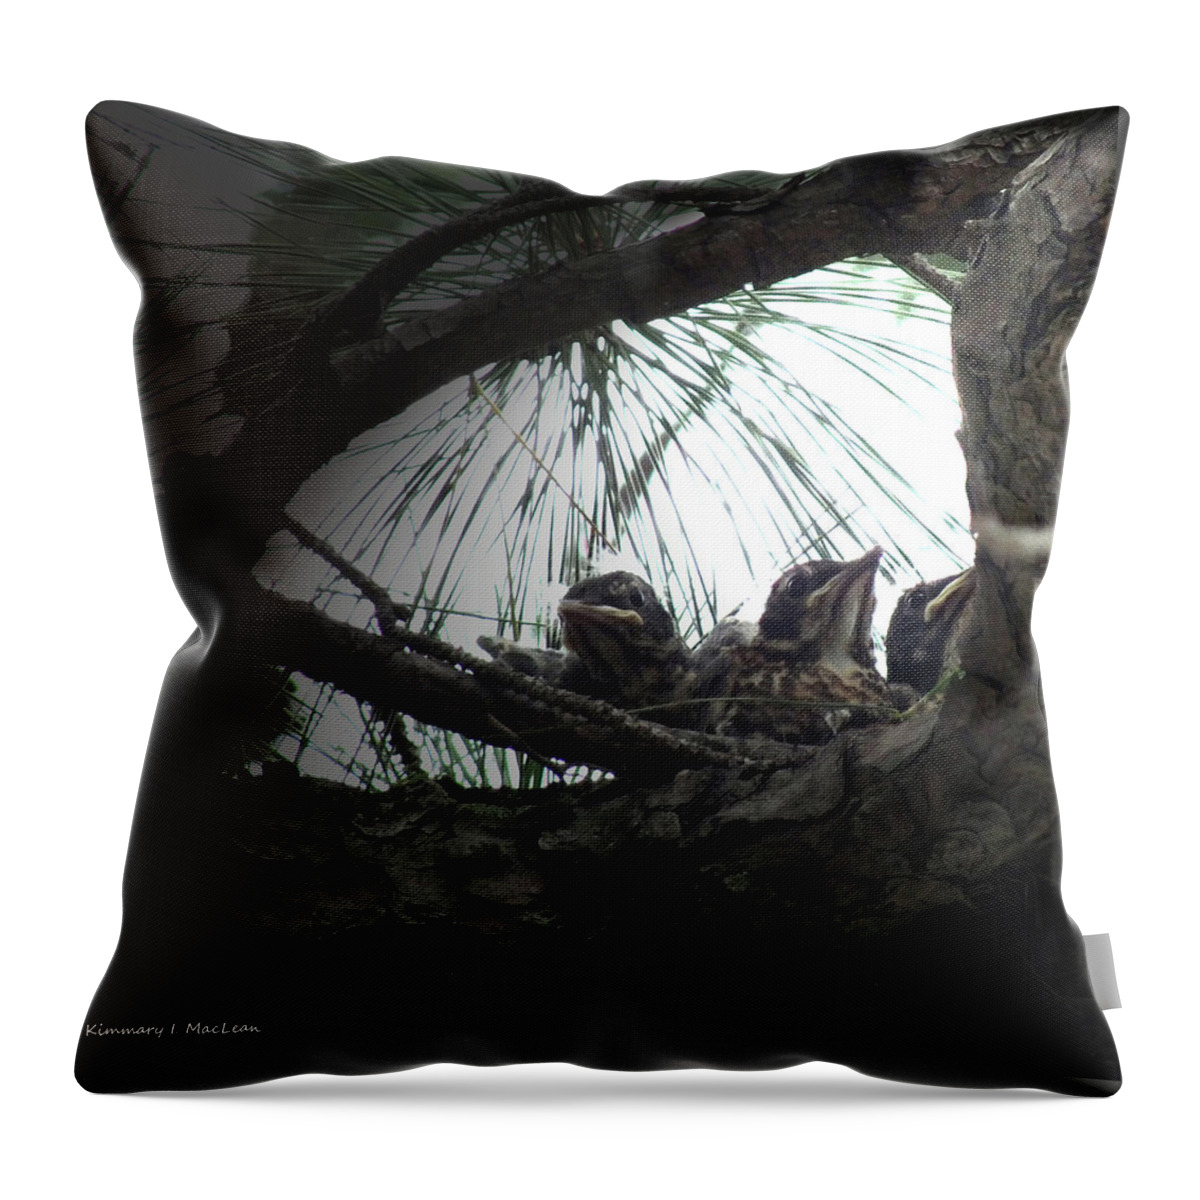 Grumpy Throw Pillow featuring the photograph Grumpy Birds by Kimmary MacLean